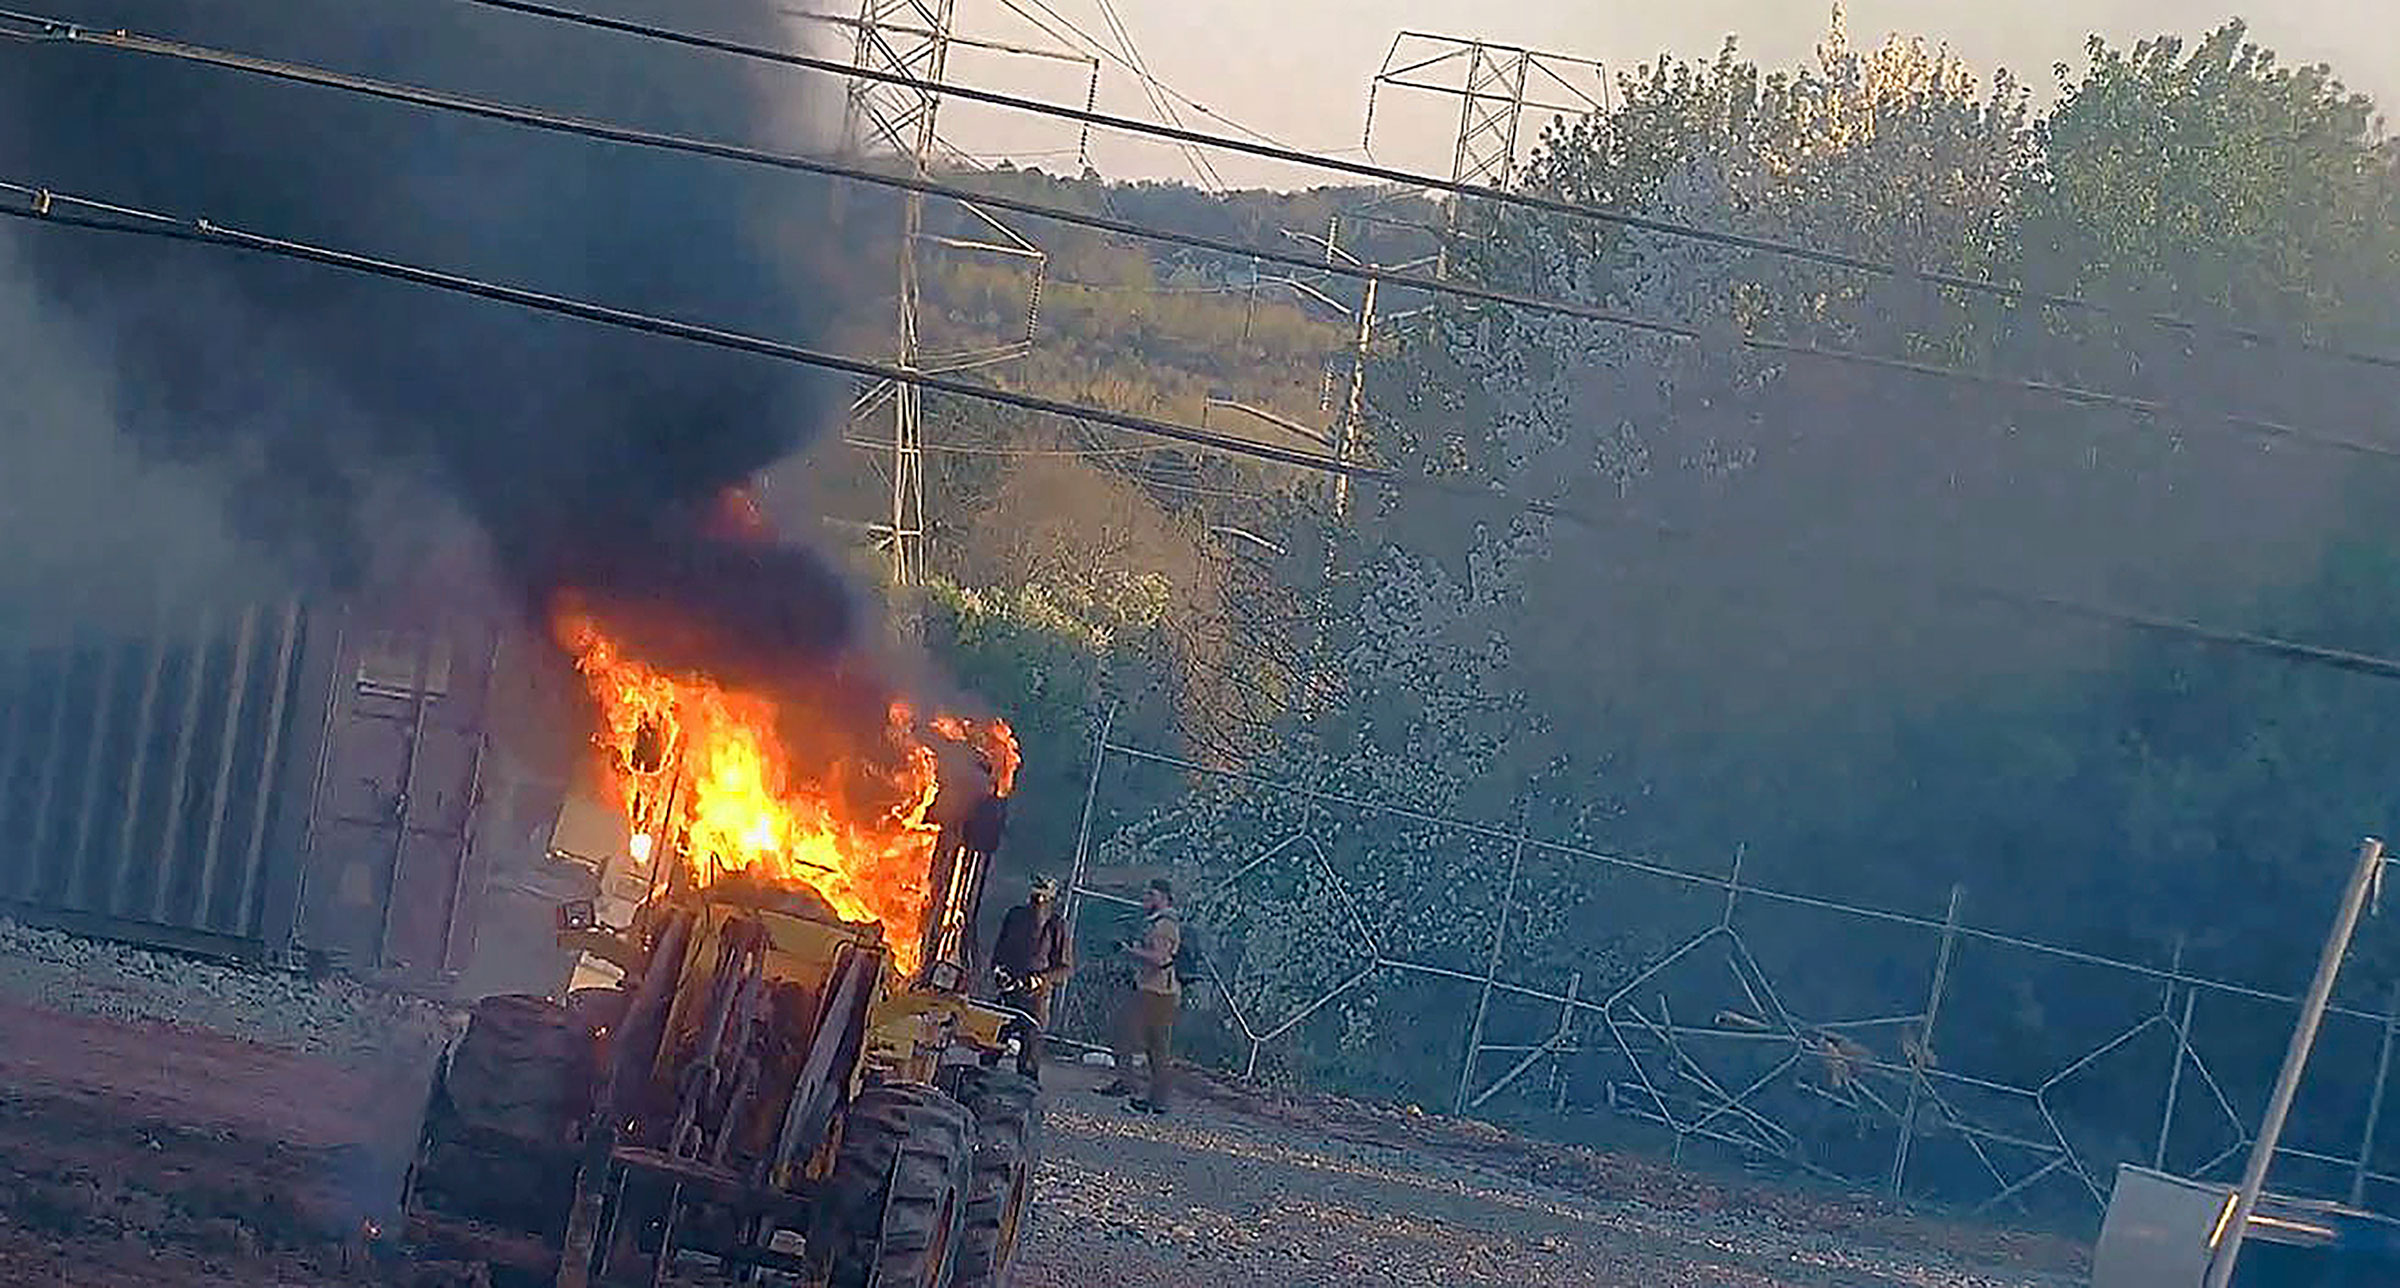 Construction equipment set on fire on March 4, 2023 by a group protesting the planned public safety training center, according to police. (Atlanta Police Department/AP)